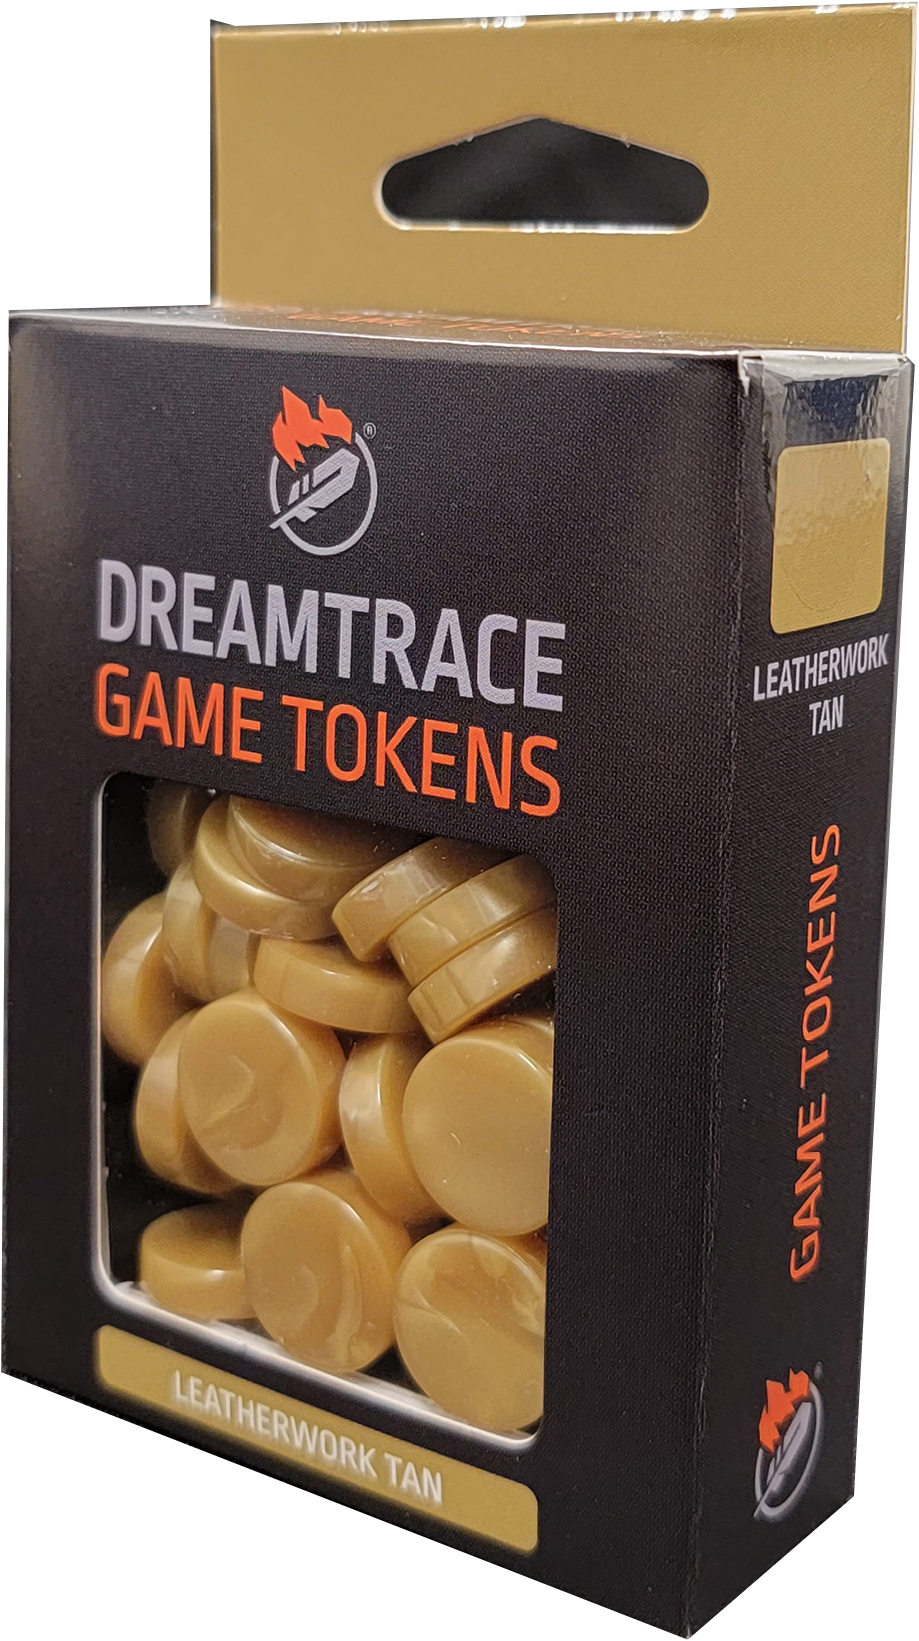 Dreamtrace Gaming Tokens: Leatherwork Tan 